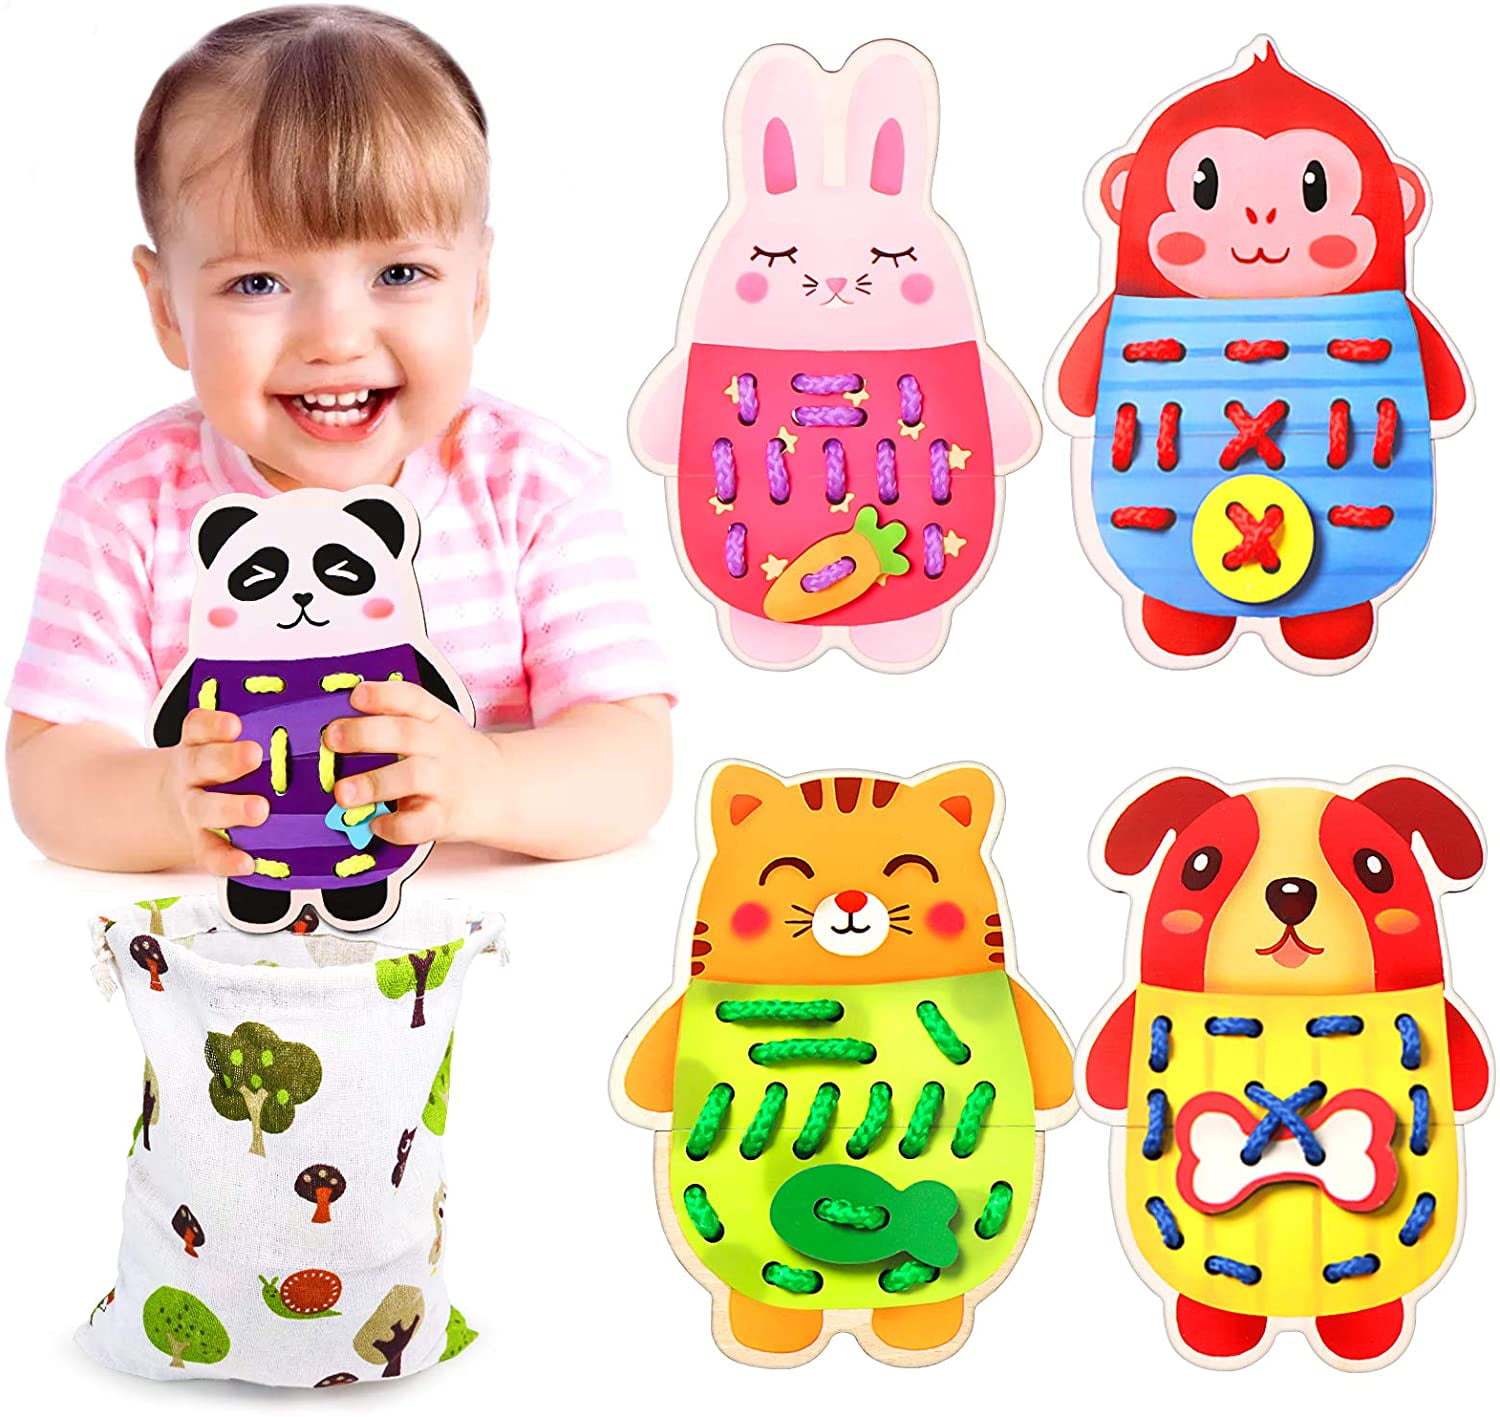 Creative Fruit Children Lacing Threading Kids Infant Puzzle Wood Wooden Toy Gift 